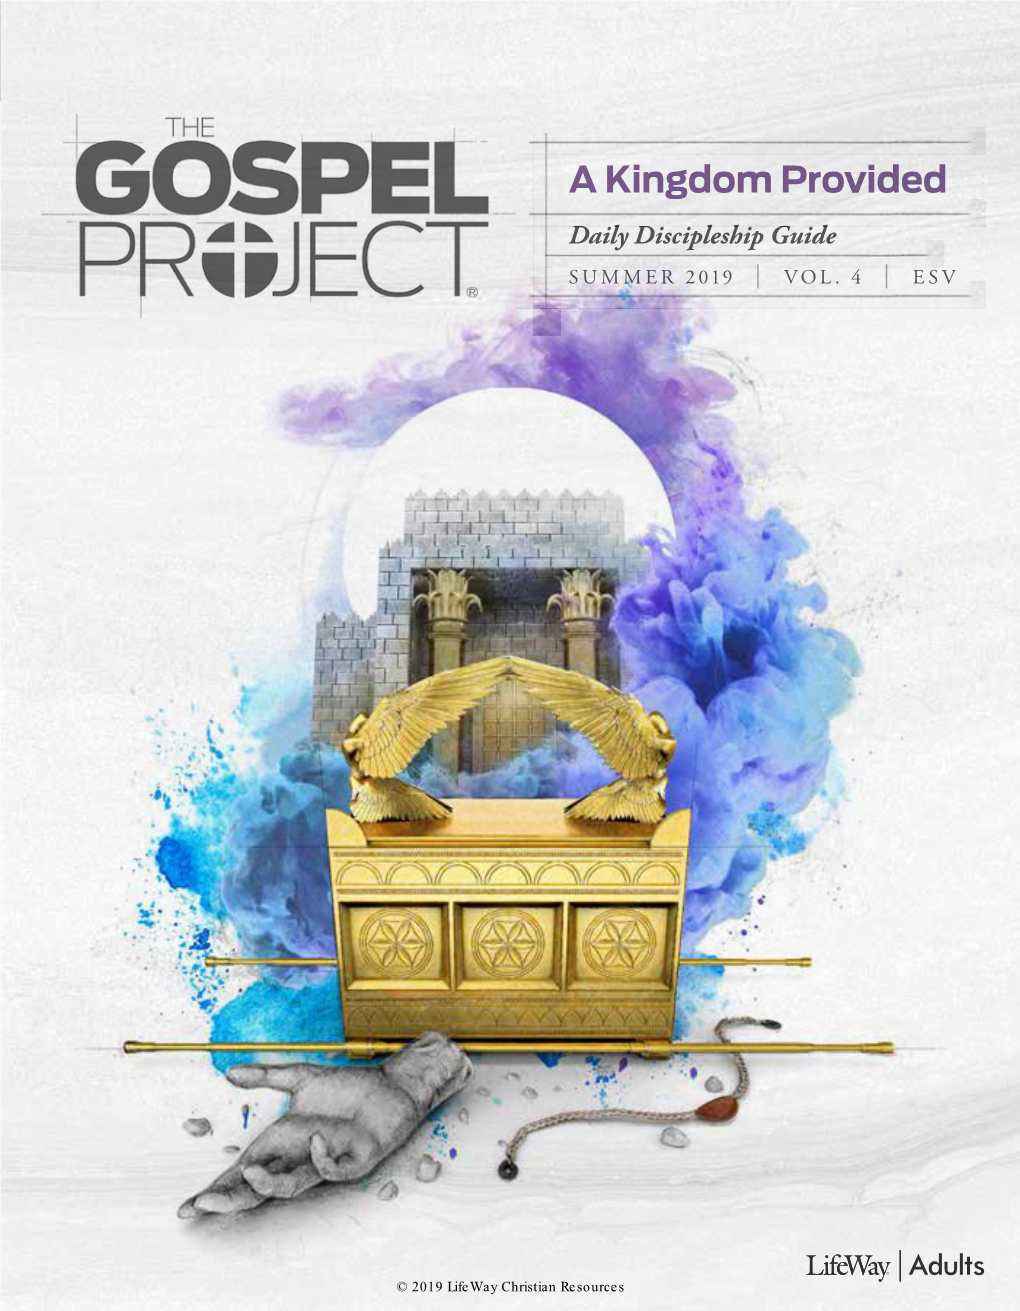 A Kingdom Provided Daily Discipleship Guide SUMMER 2019 | VOL